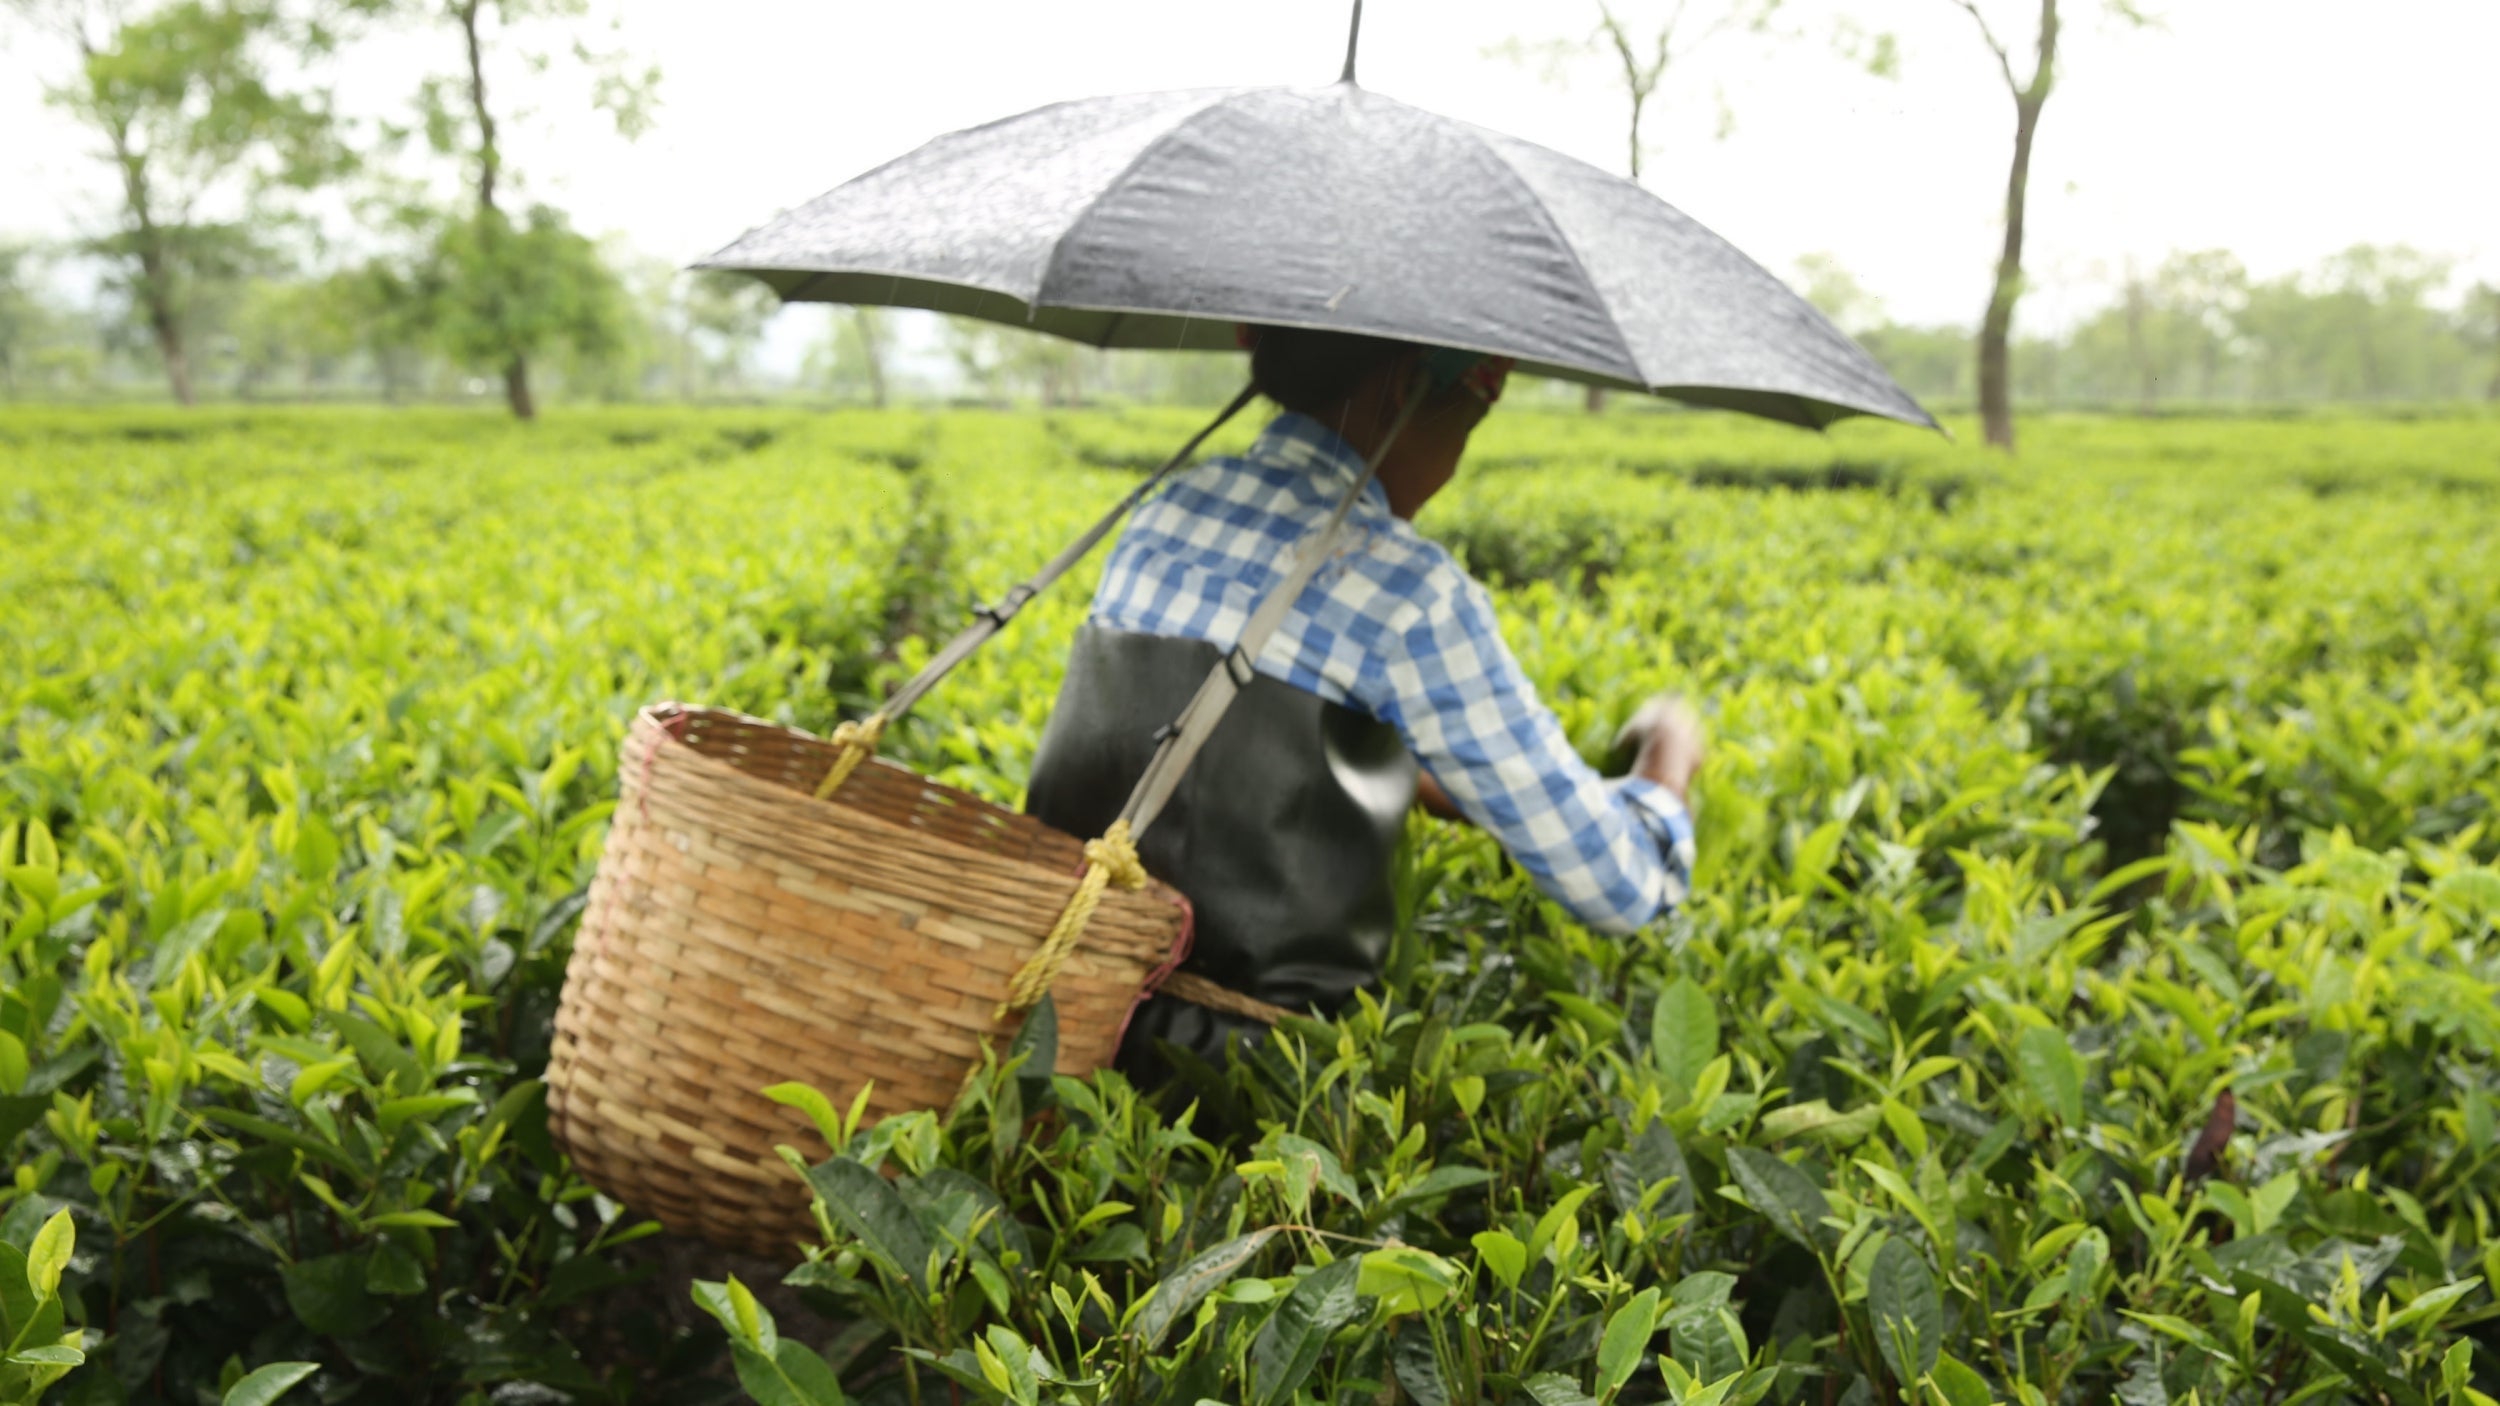 Women working on tea plantations in Assam regularly clock up 13 hours of “back-breaking” work a day, Oxfam said.